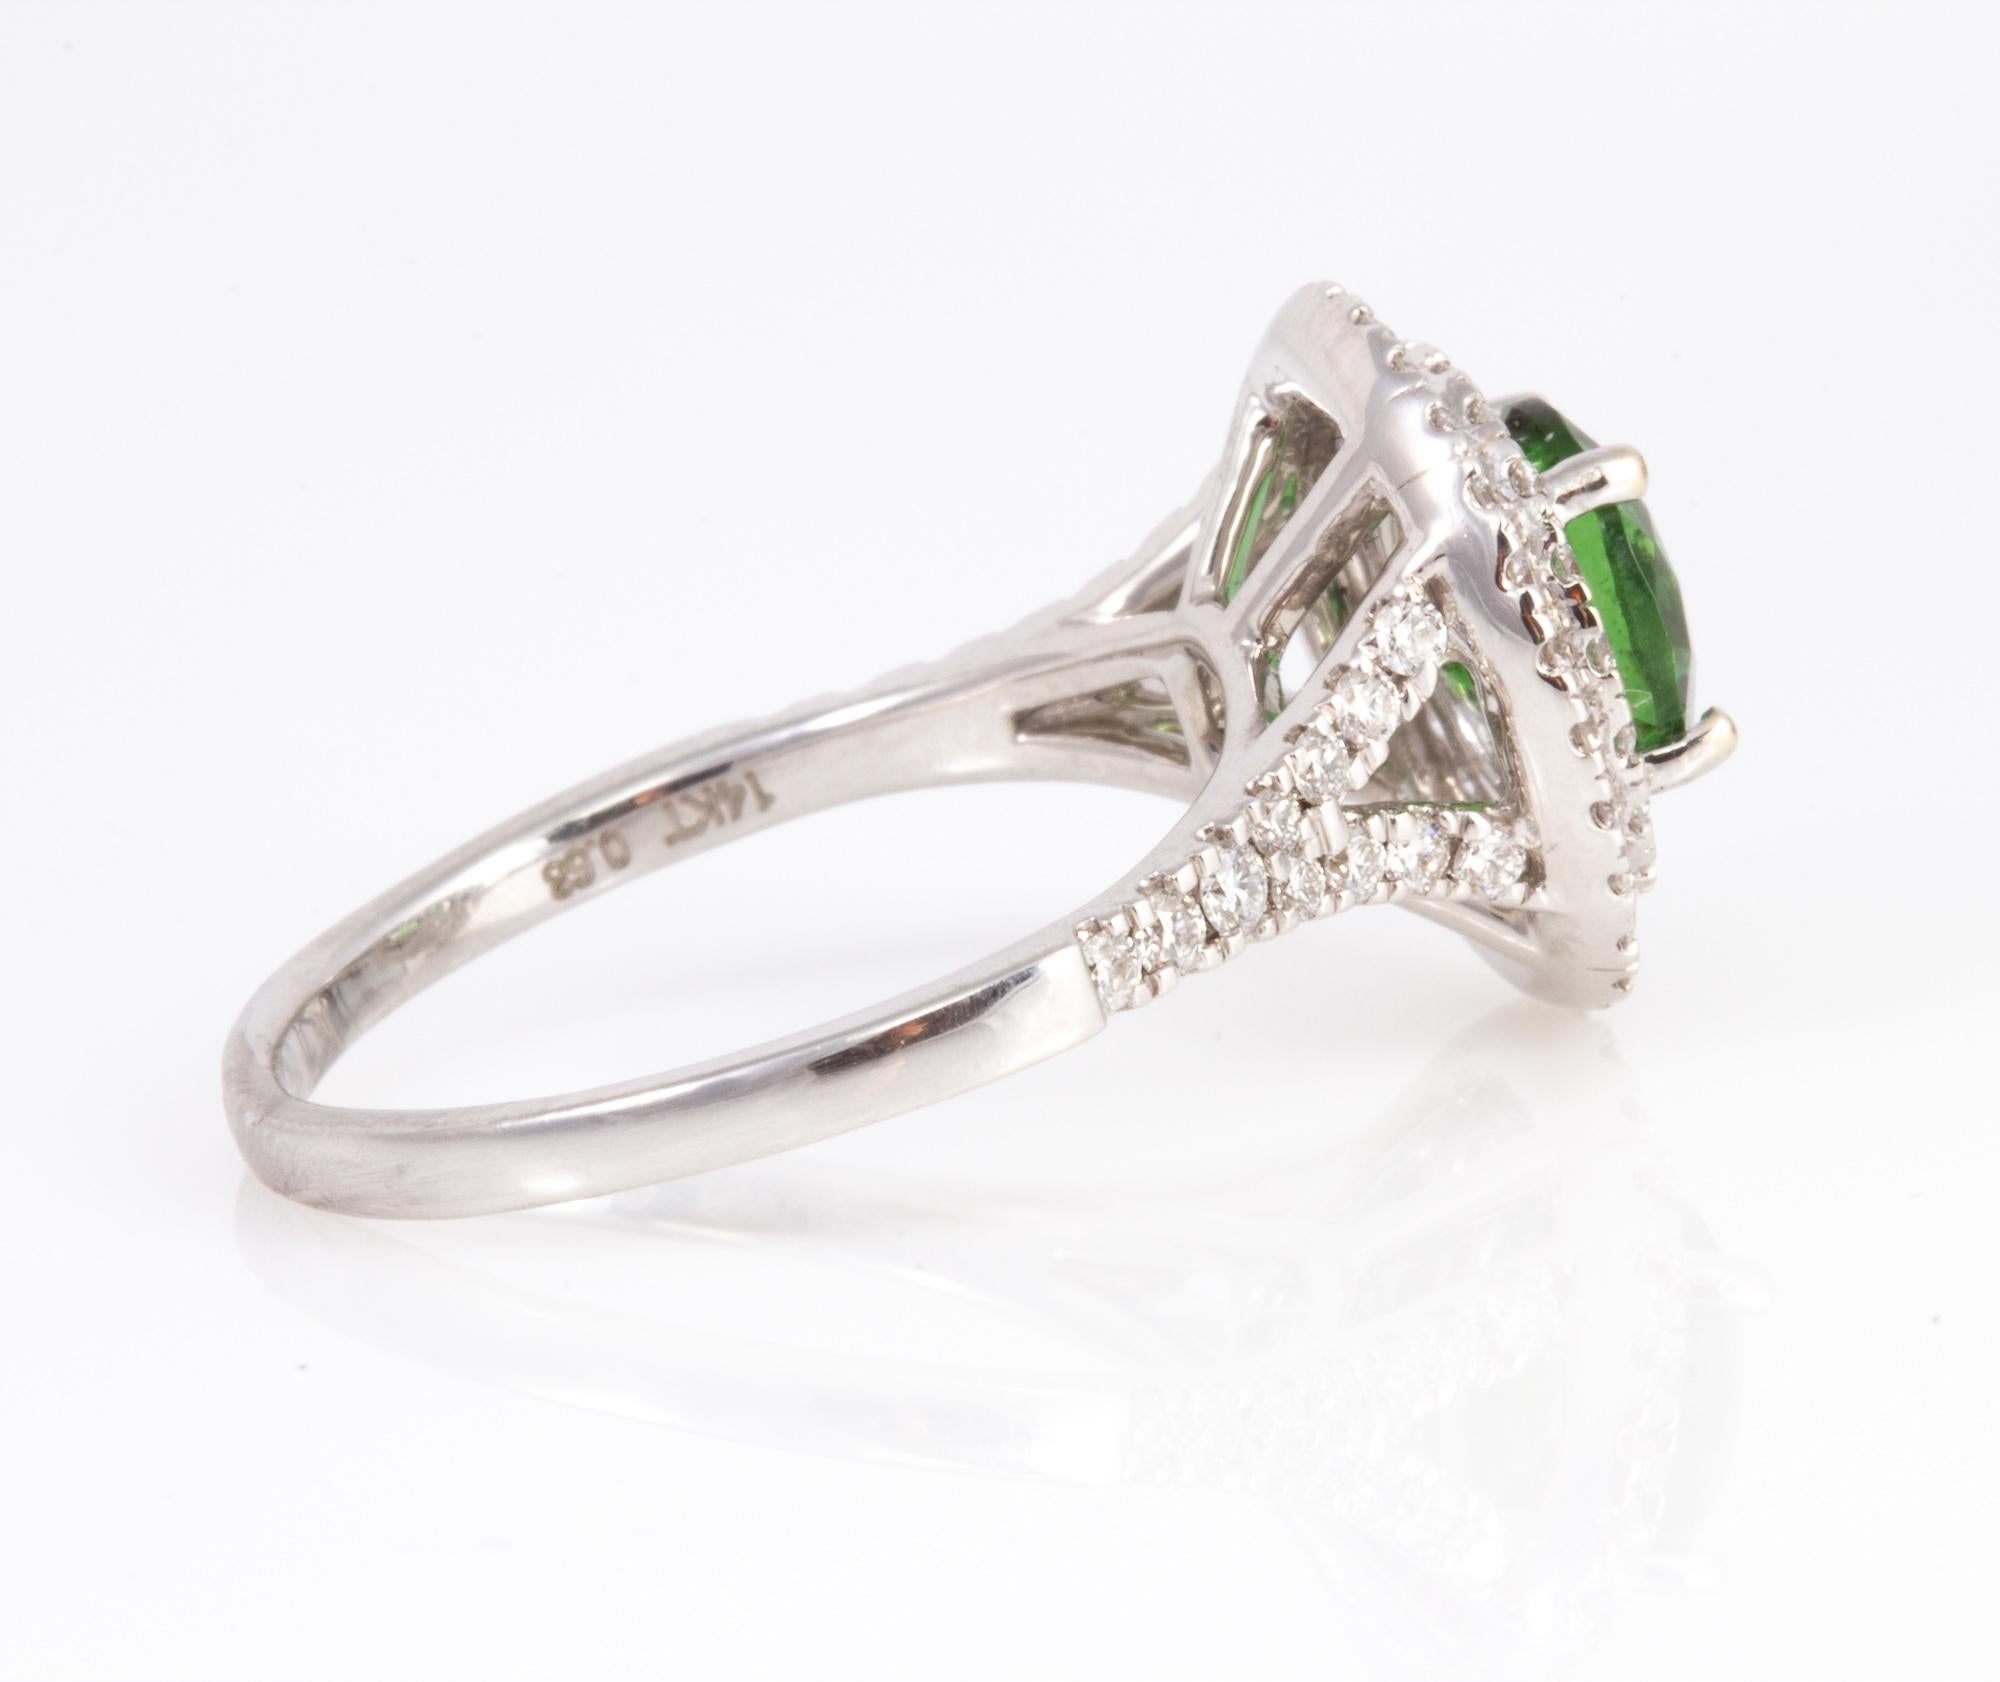 Exceptionally Well Cut 1.26 Carat Chrome Tourmaline and Diamond Ring 2